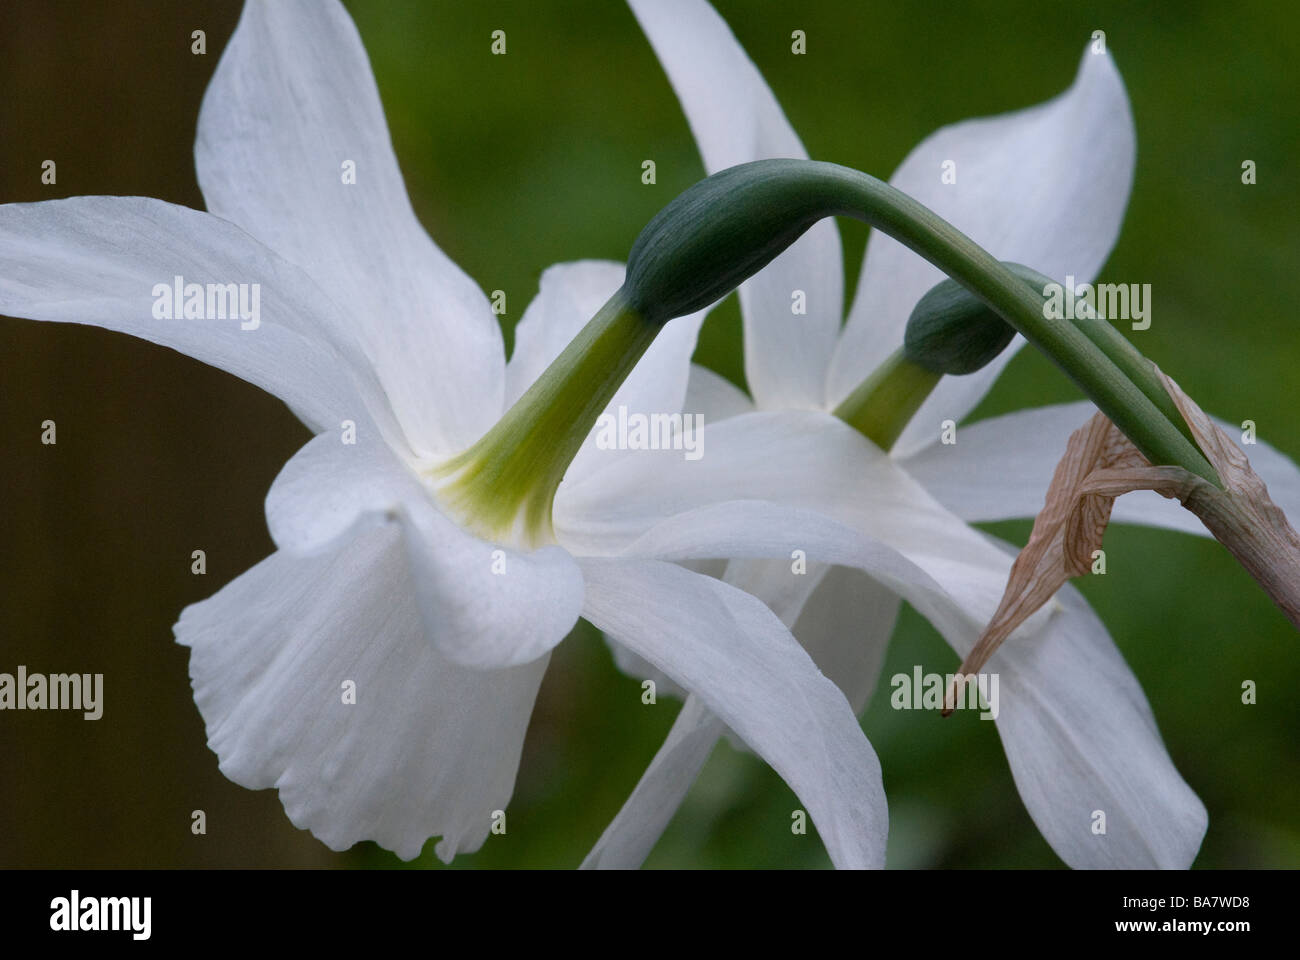 Narcissus Amaryllidaceae, Spring flowering pale cream Daffodil close up Stock Photo